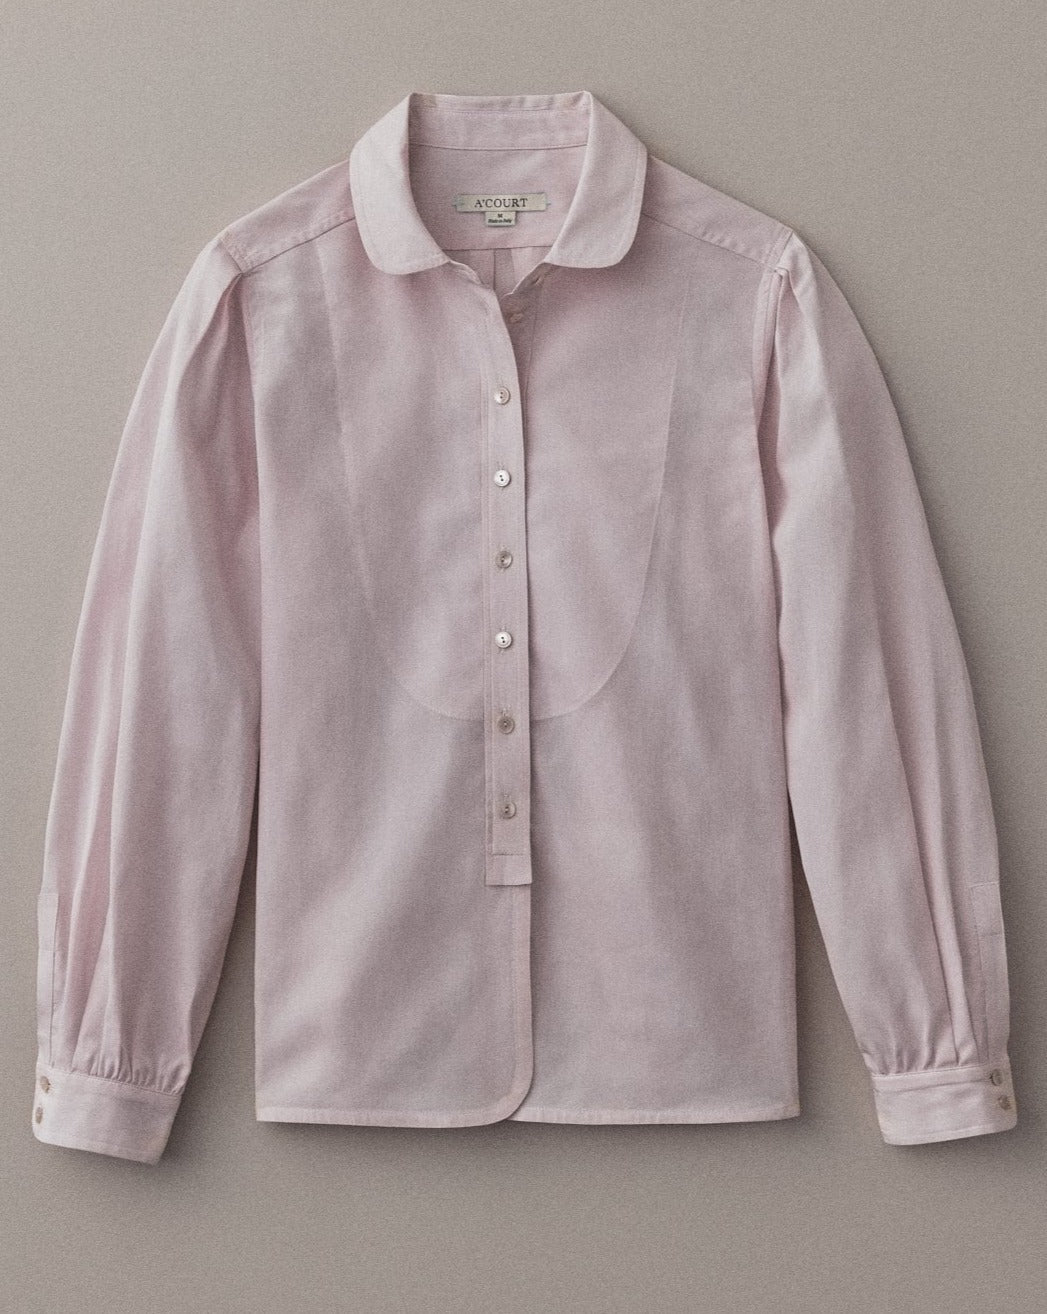 A long sleeve blouse in dusty rose cotton with a classic menswear silhouette lies flat on a light brown field.